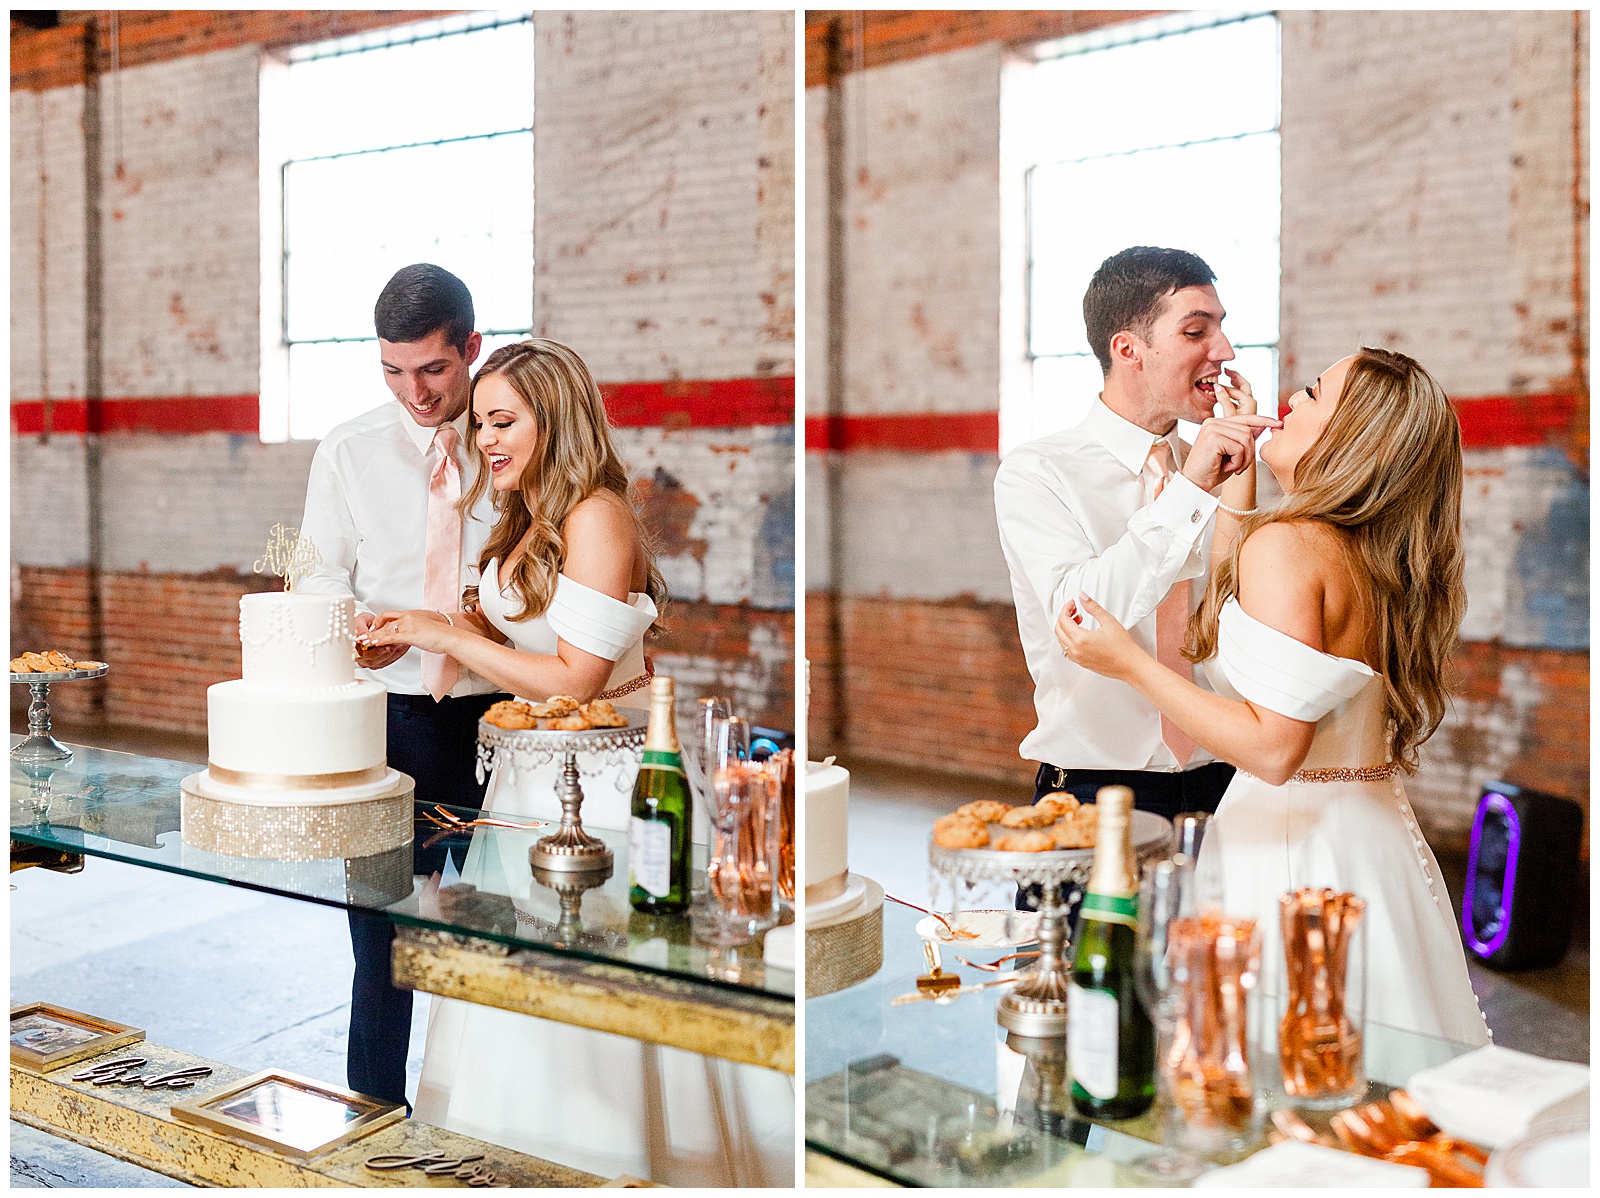 Stunning Modern bride and groom eat wedding cake from Summer Wedding in Charlotte, NC | Check out the full wedding at KevynDixonPhoto.com